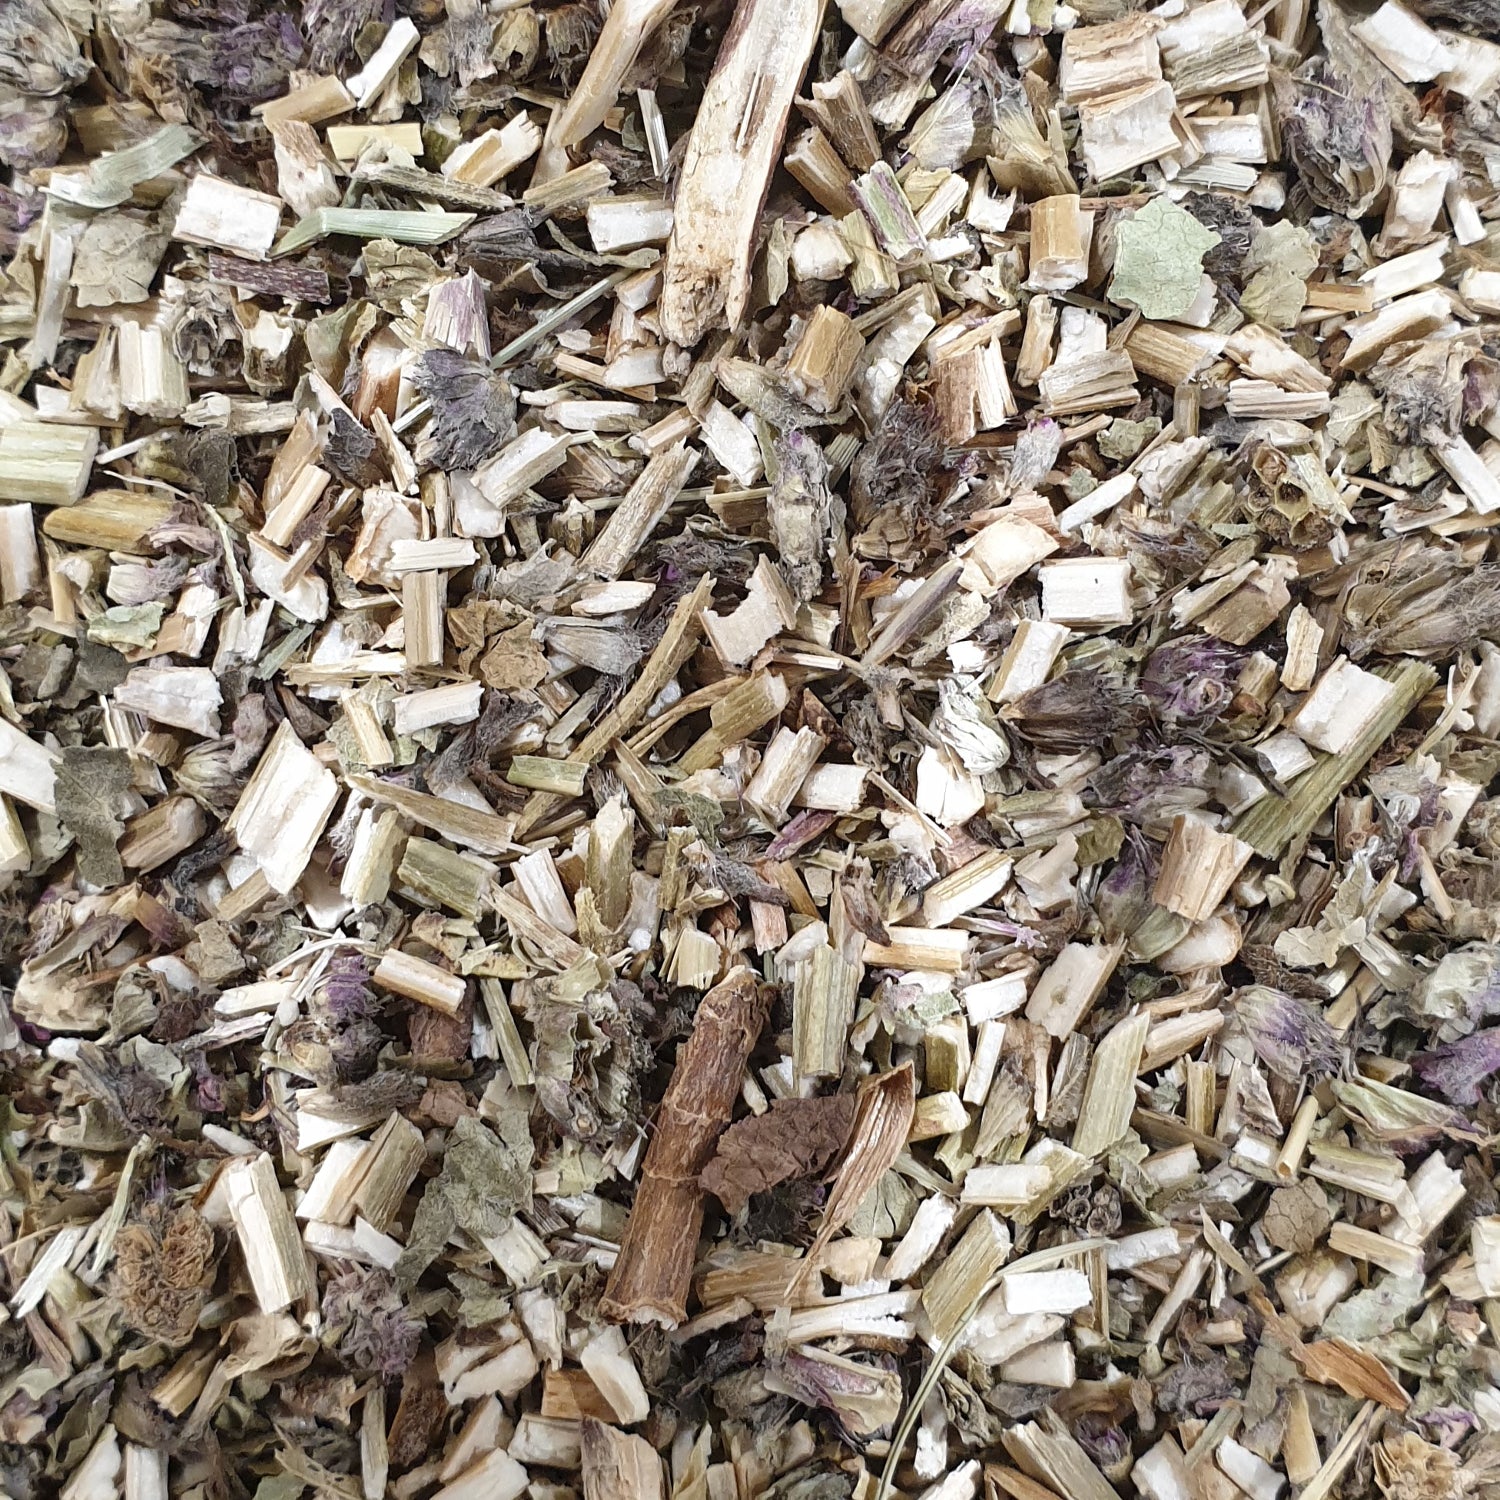 Betony Wood - Is an ideal herb for purification, protection, and the expulsion of evil spirits, nightmares, and despair